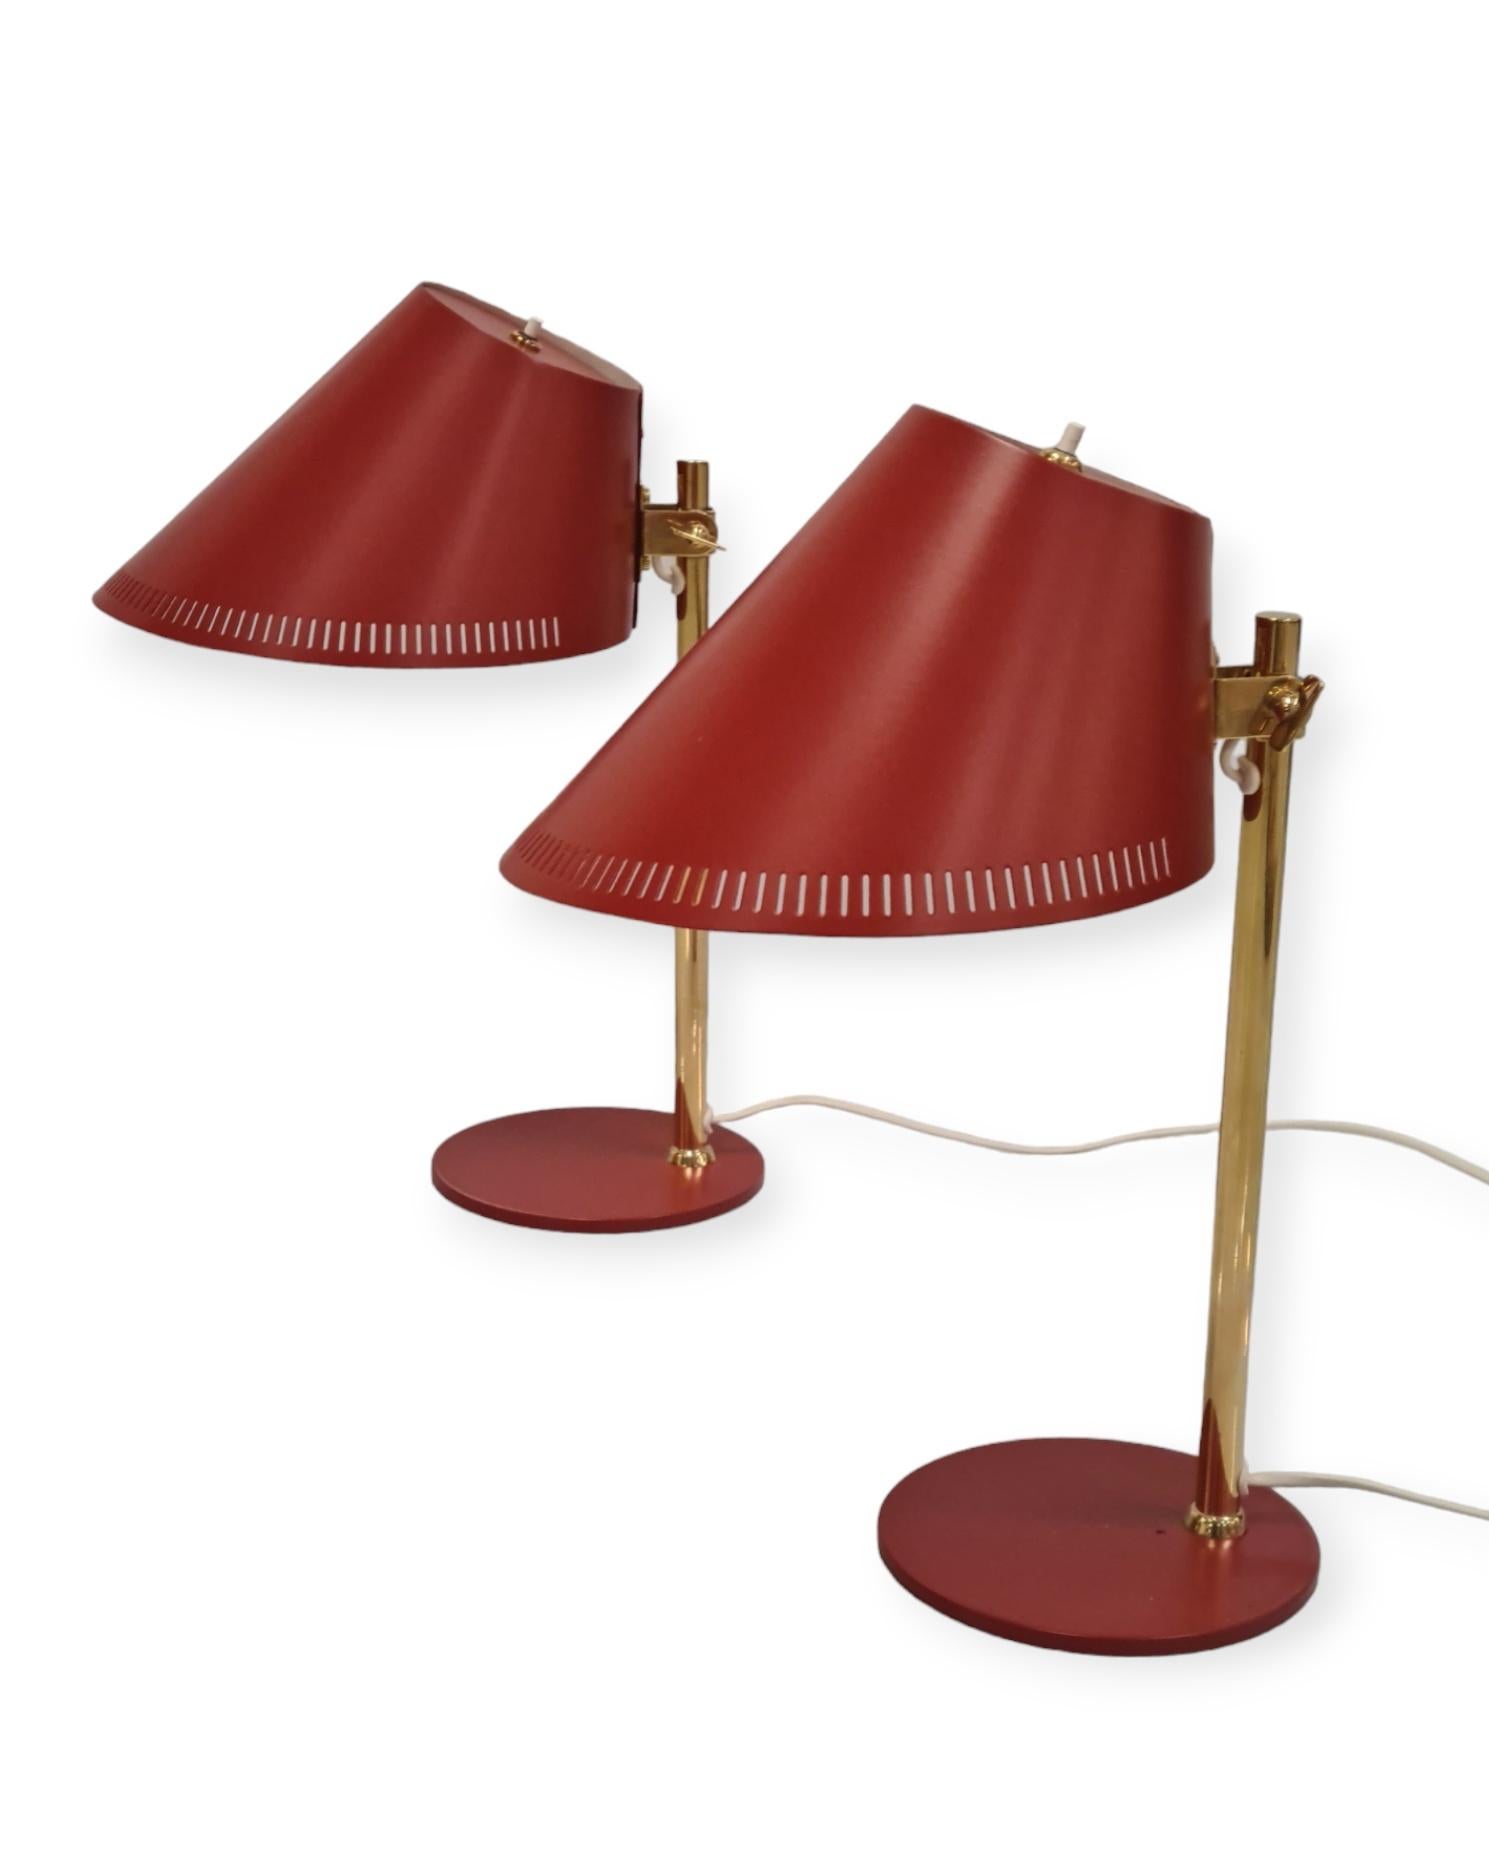 An exquisite example of a beautiful classic design with features that makes it suitable for a wide range of spaces especially offices, home offices or reading and working tables. 
This 9227 model table lamp has proven to be a customers favorite over